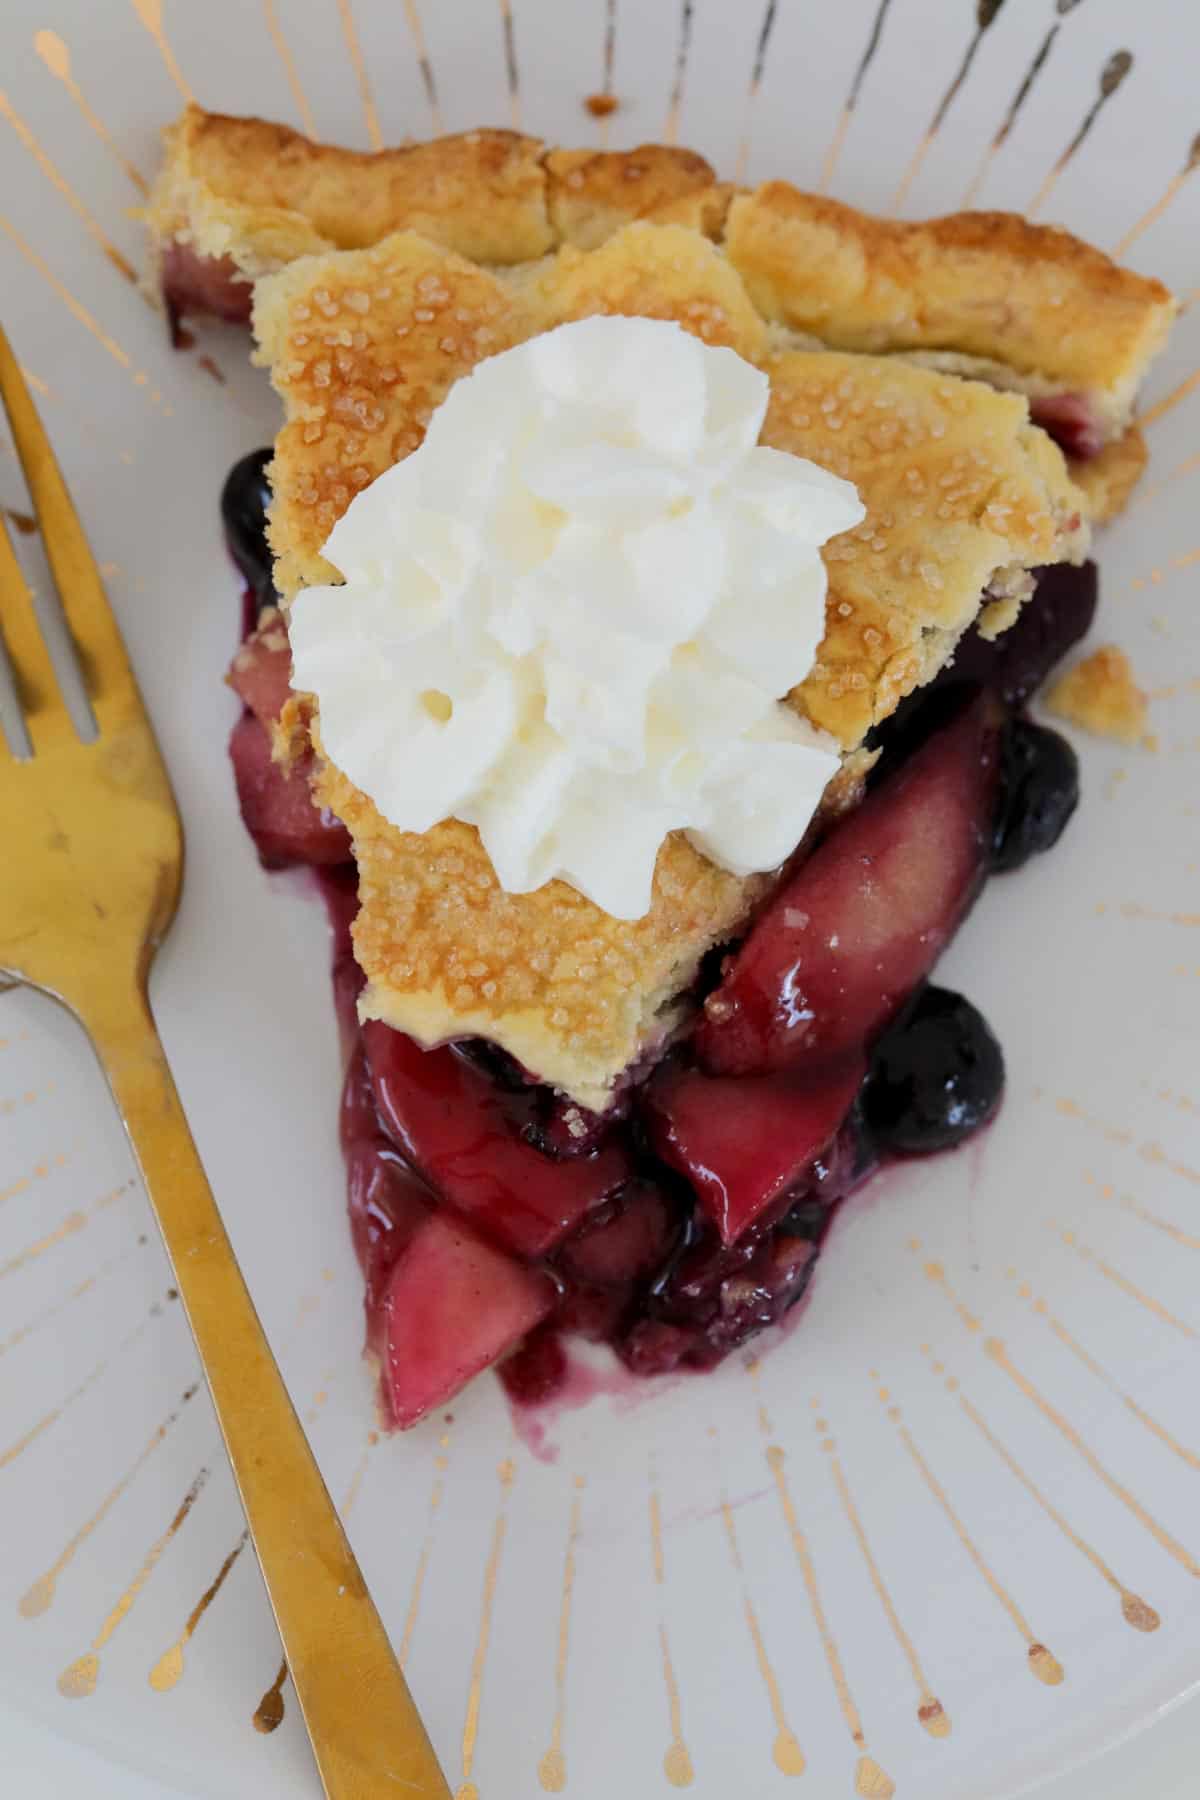 A serve of apple and berry pie with a gold fork beside it.